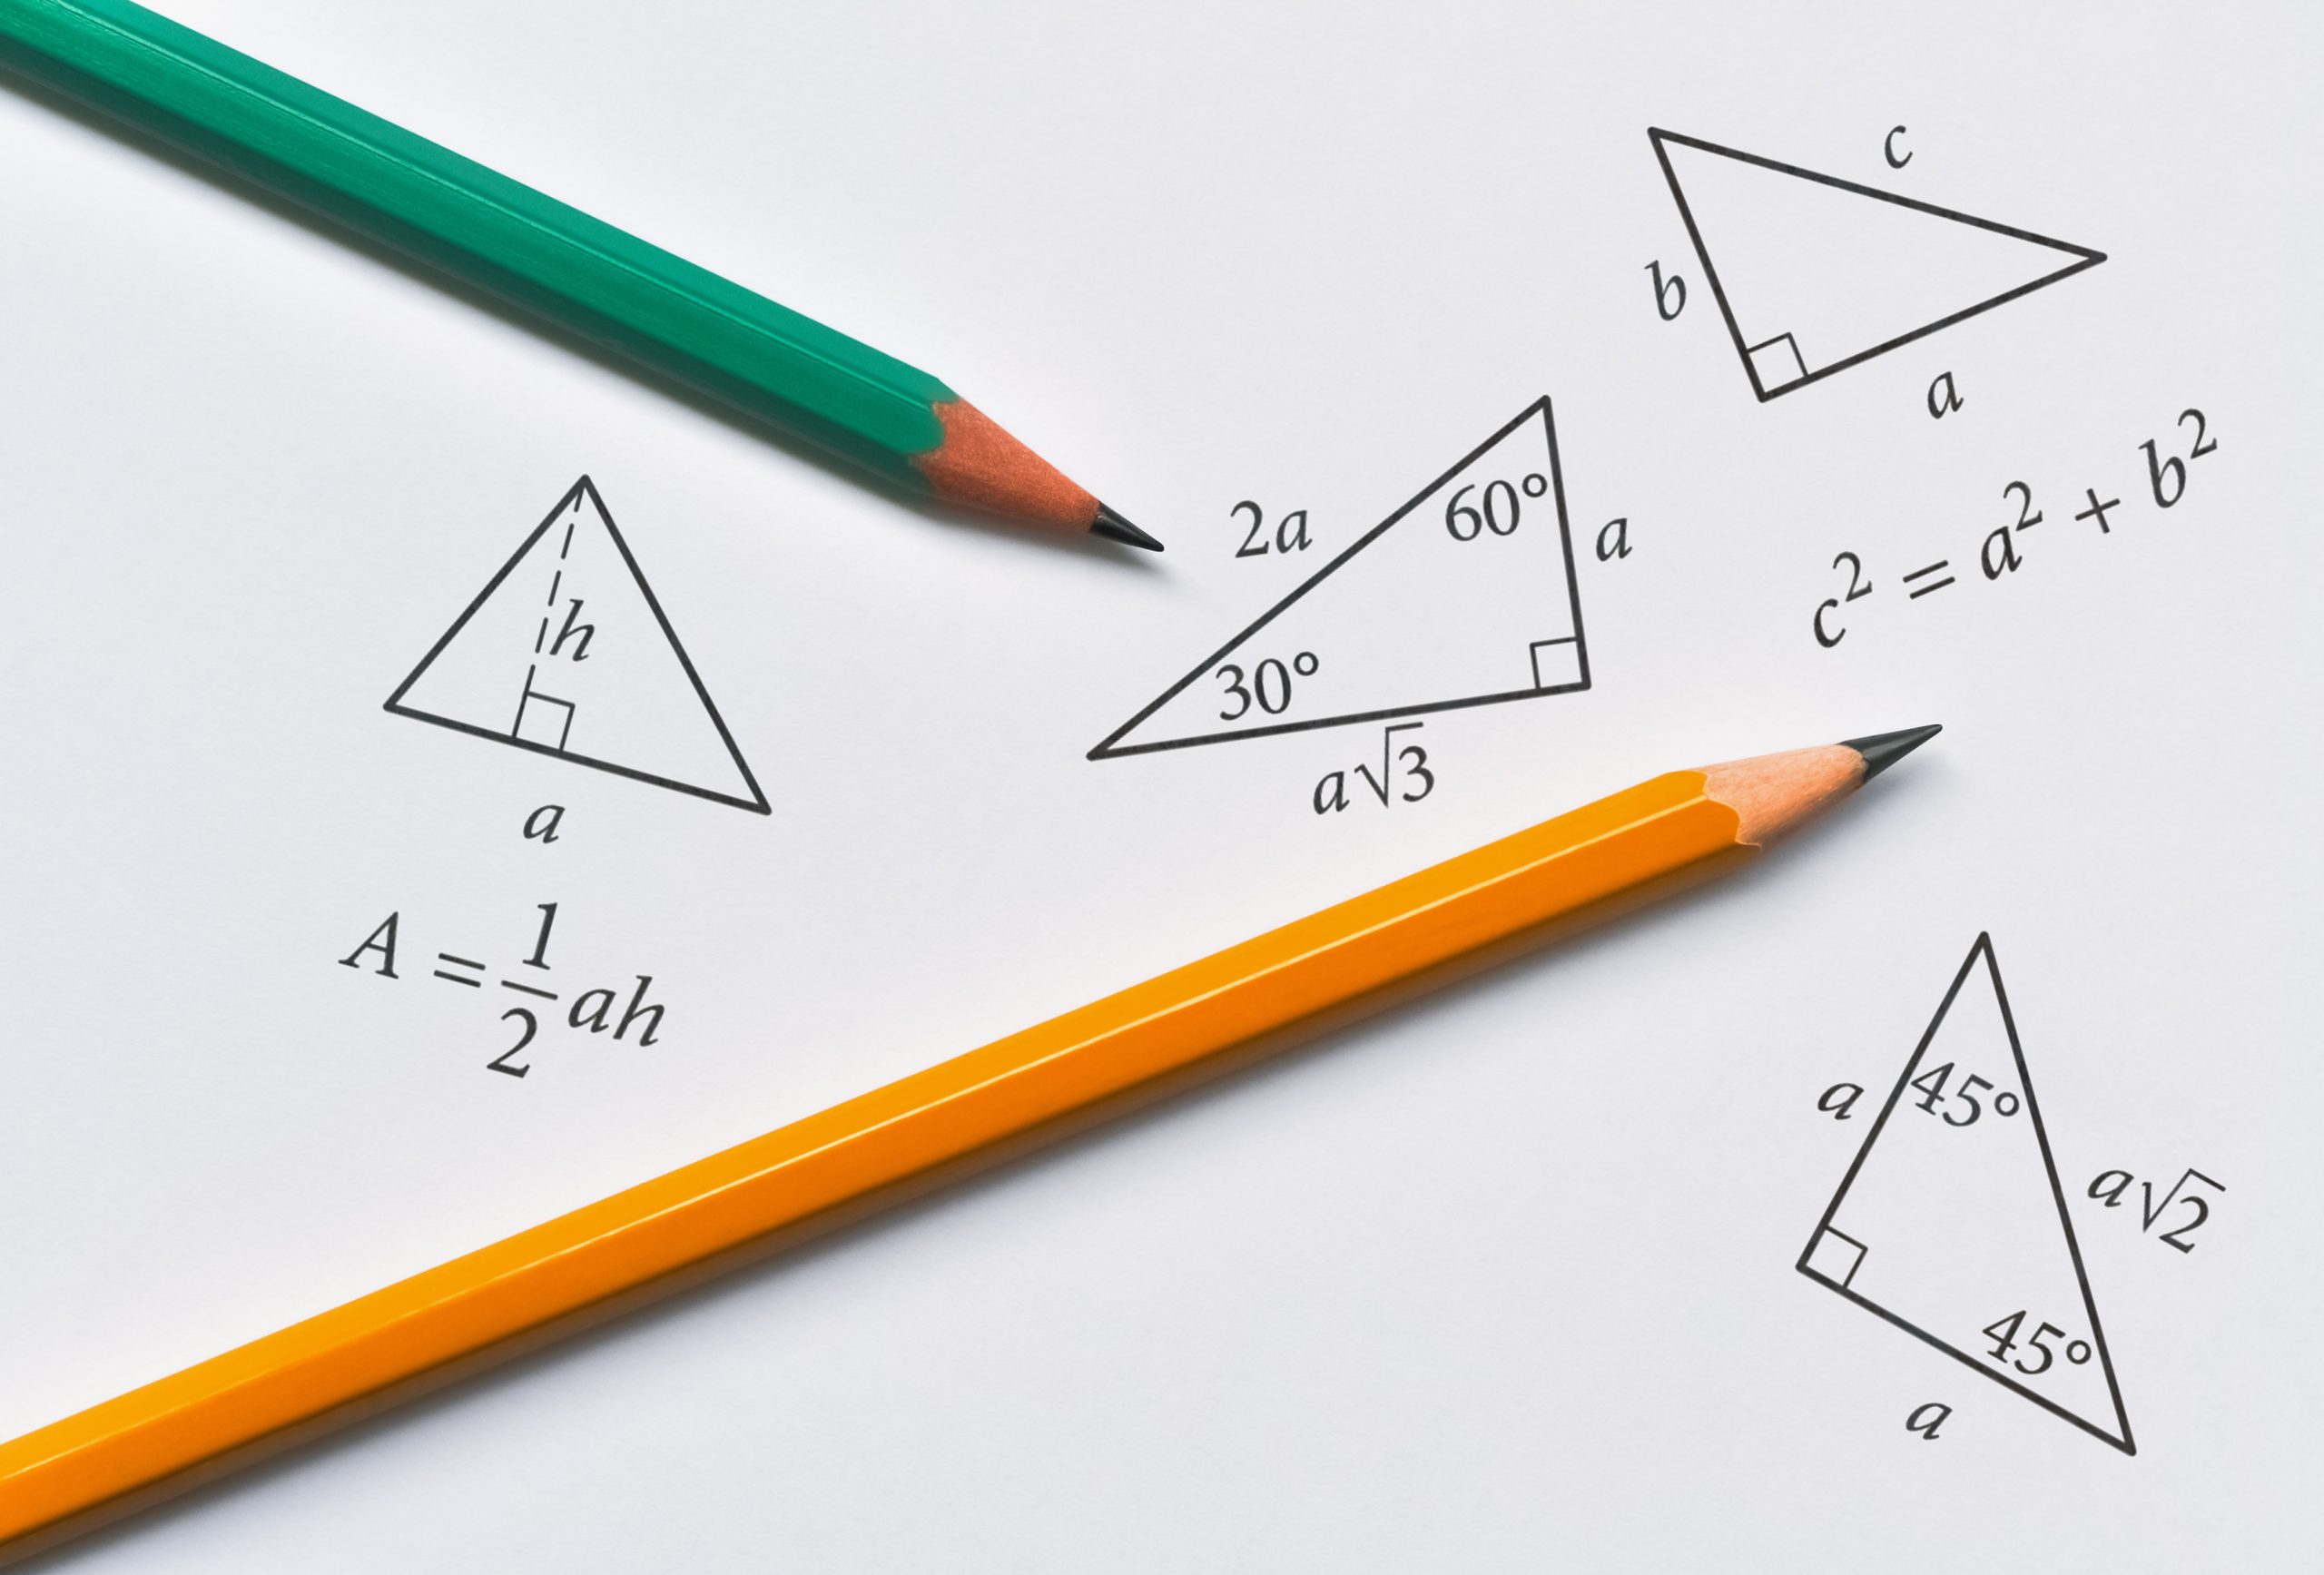 Pencils and triangles with some of their properties on bright background